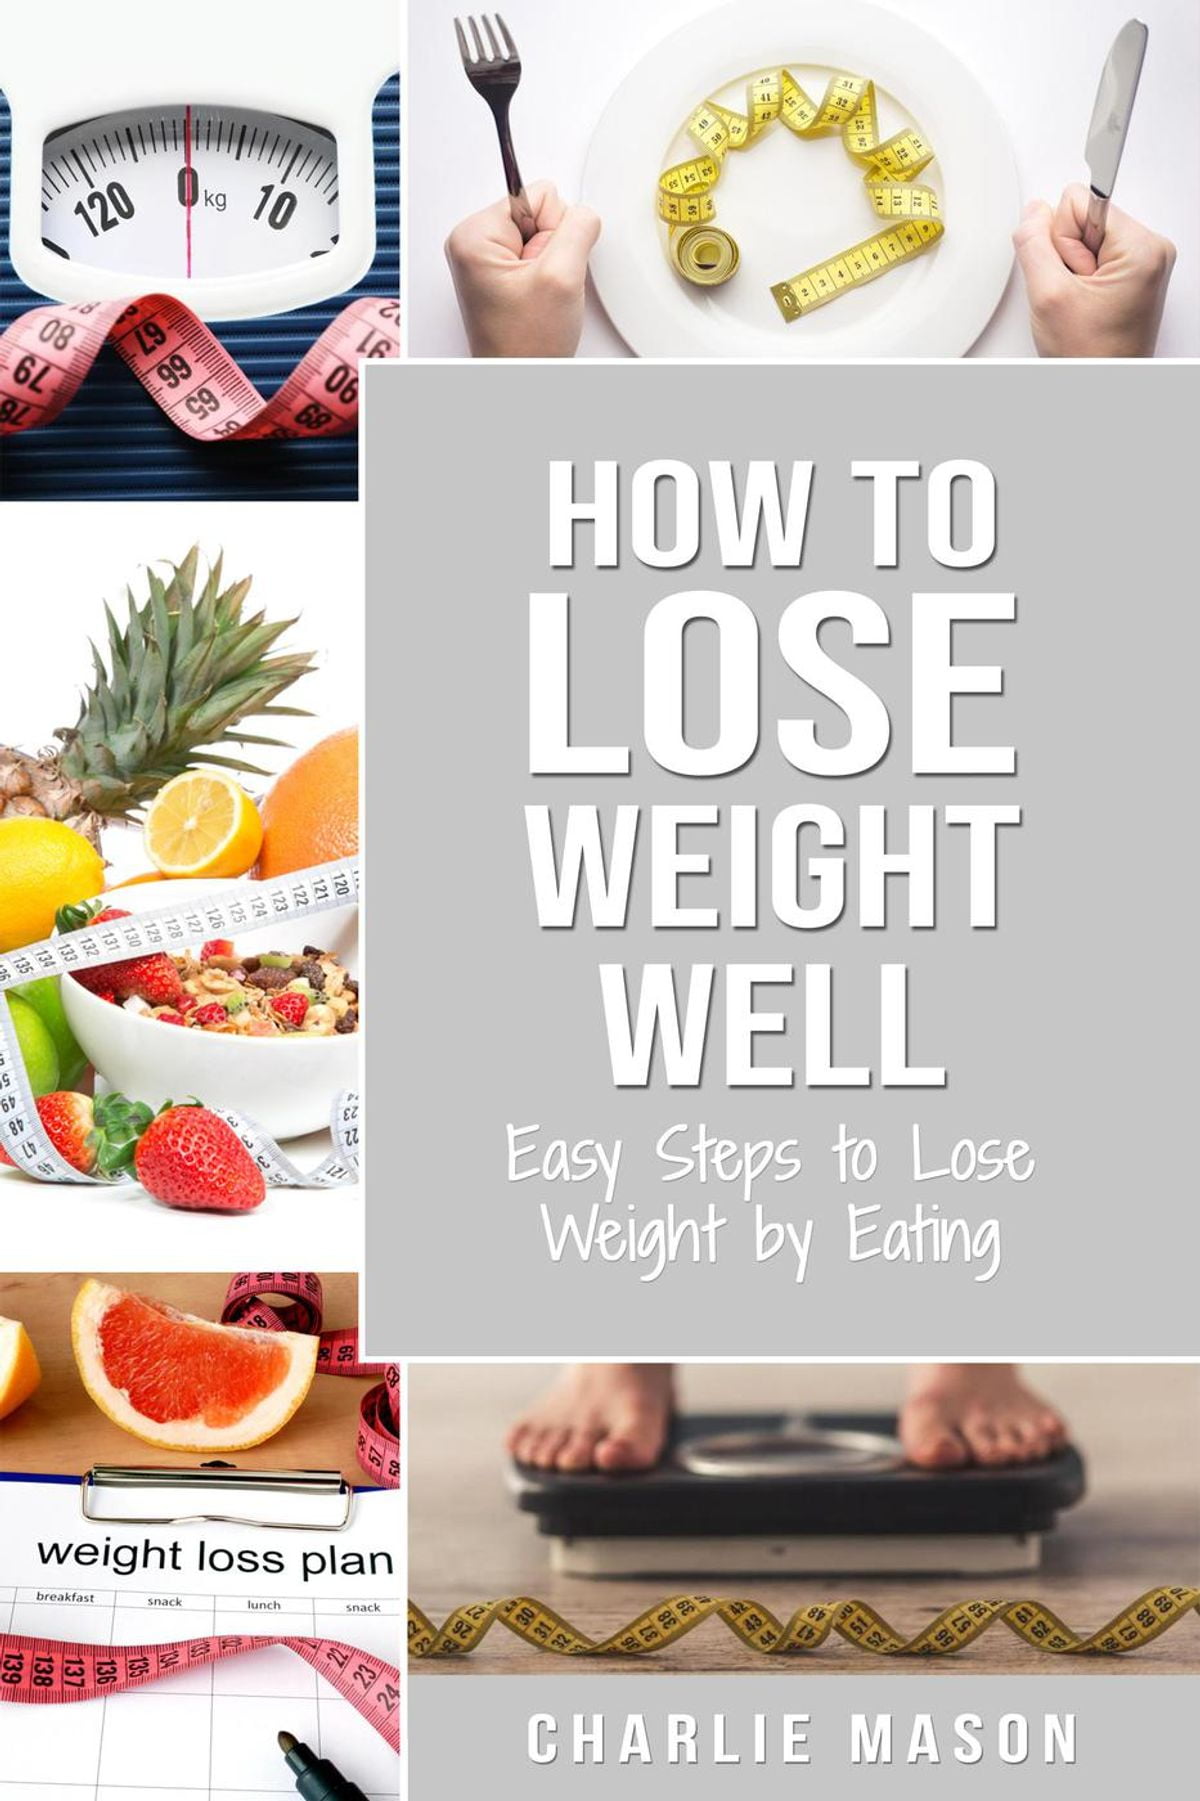 How to Lose Weight Well: Easy Steps to Lose Weight by Eating - eBook ...